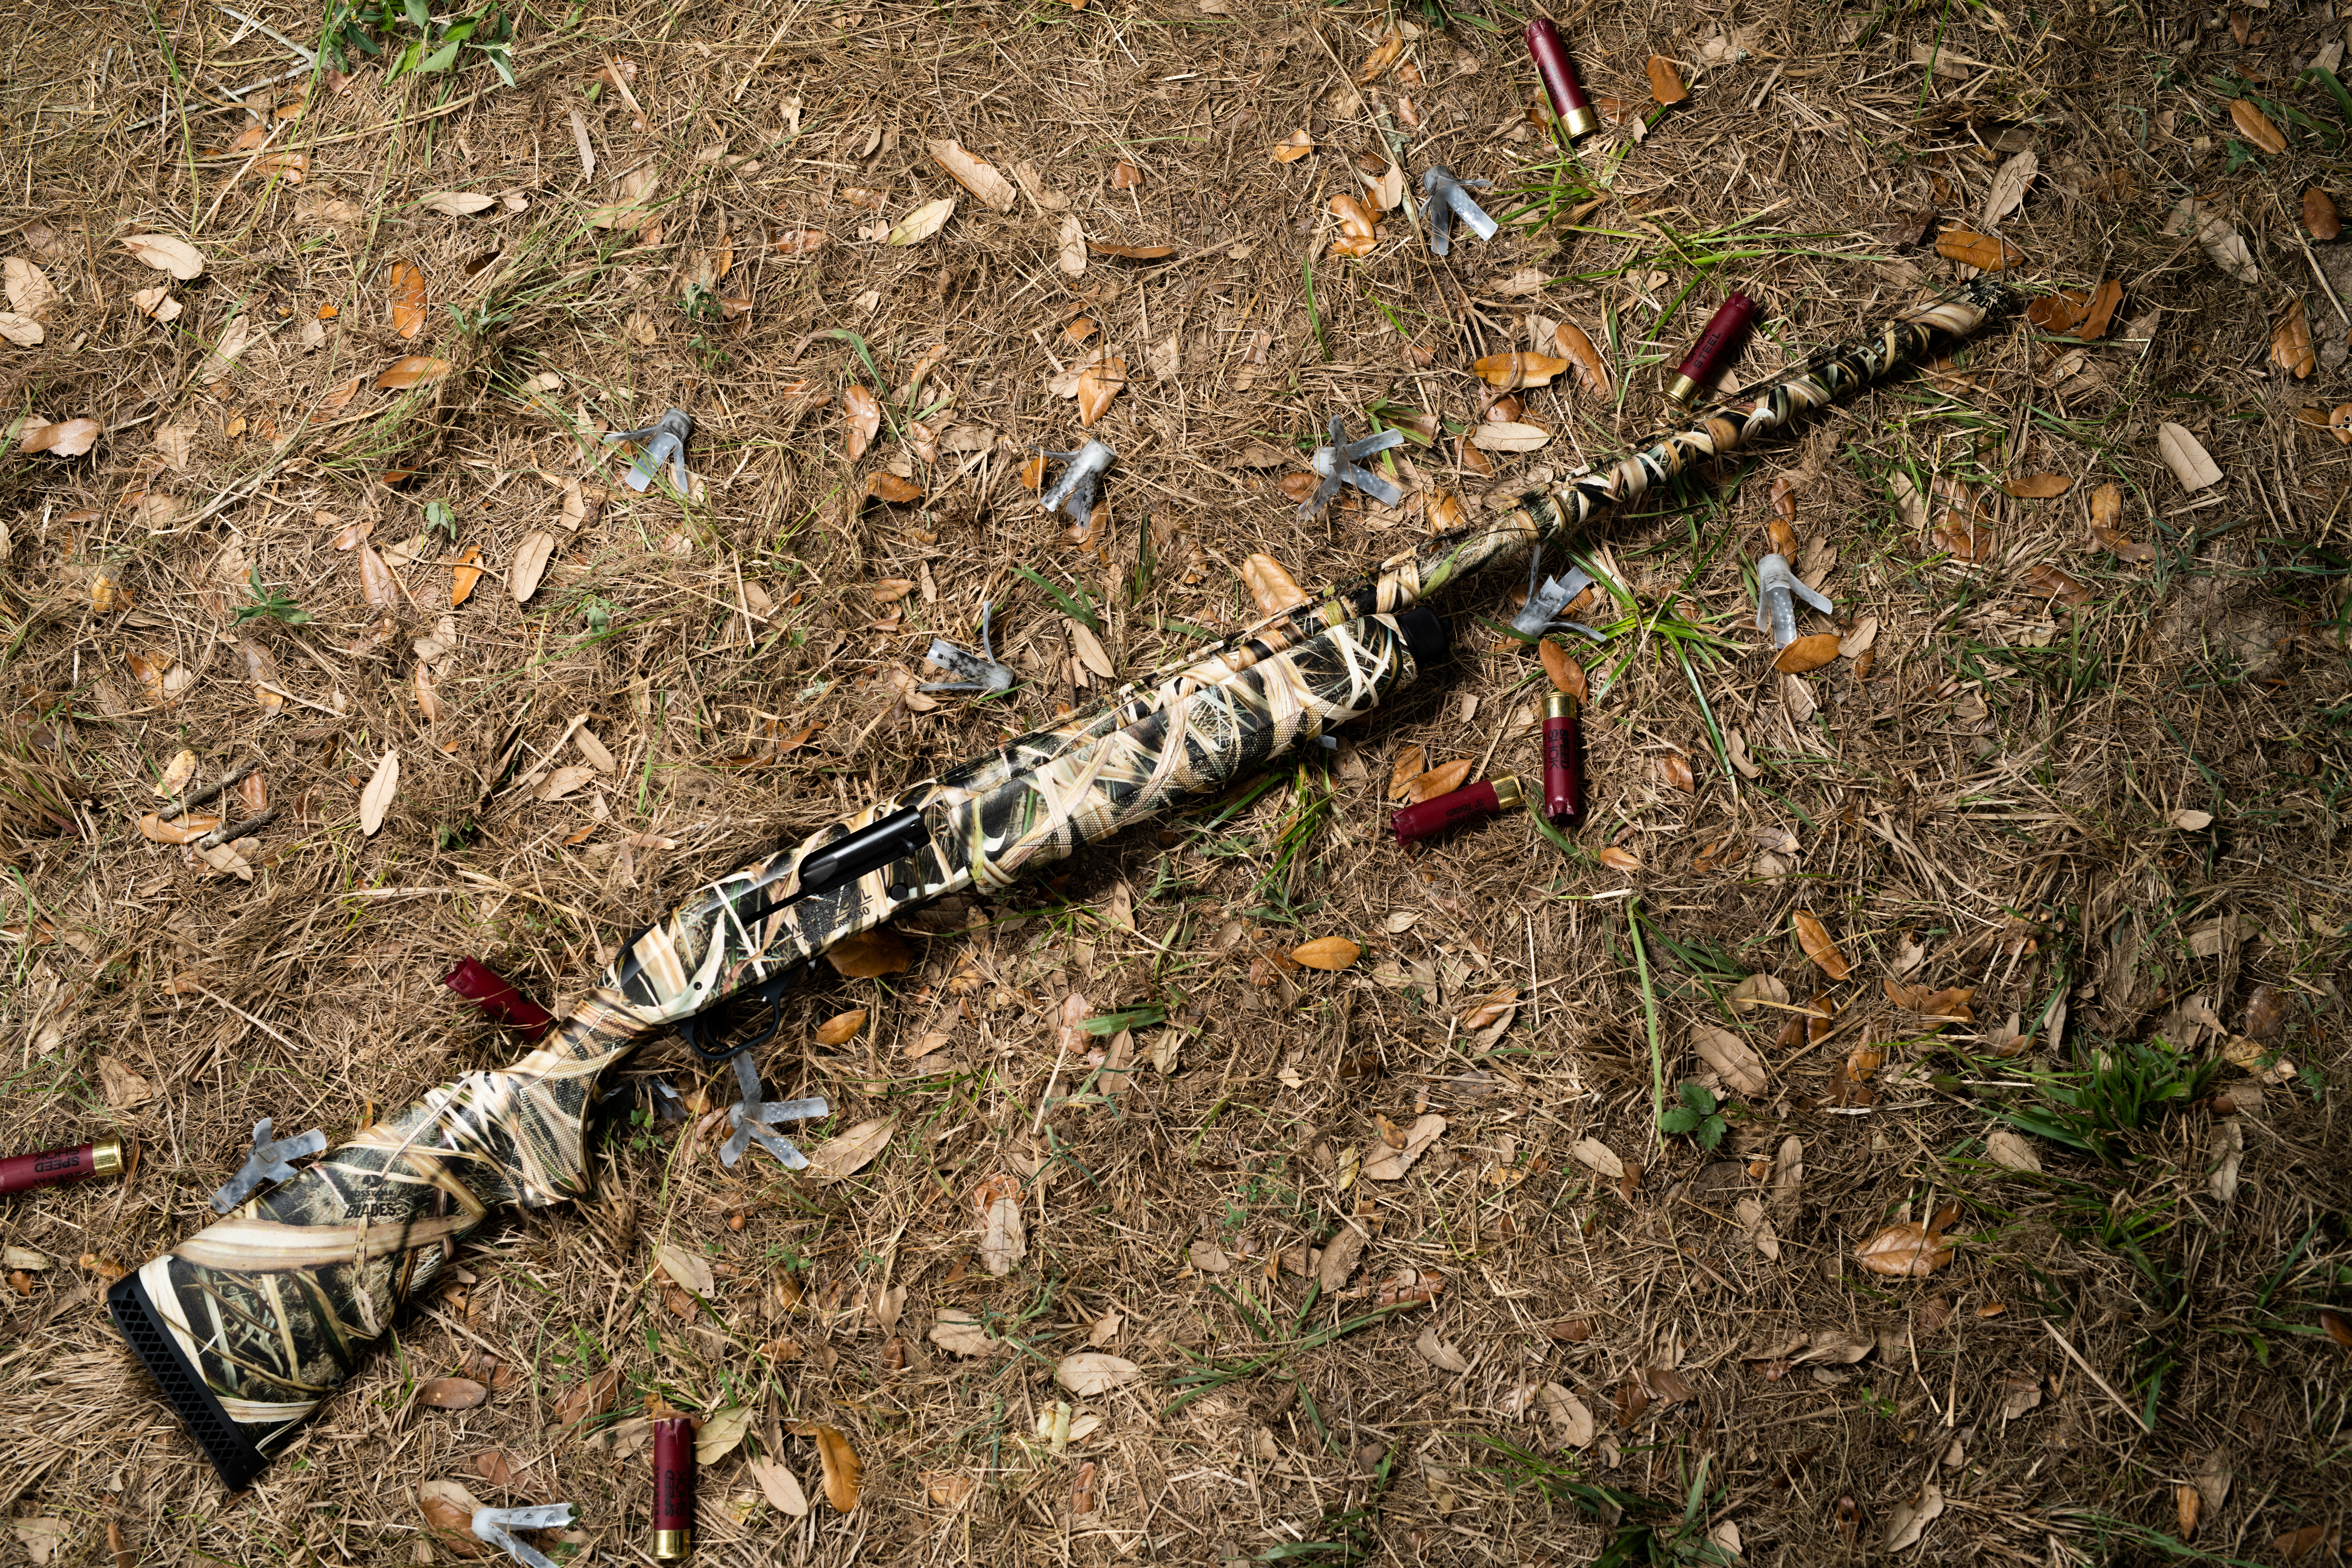 The Mossberg 930 is a reliable autoloader.